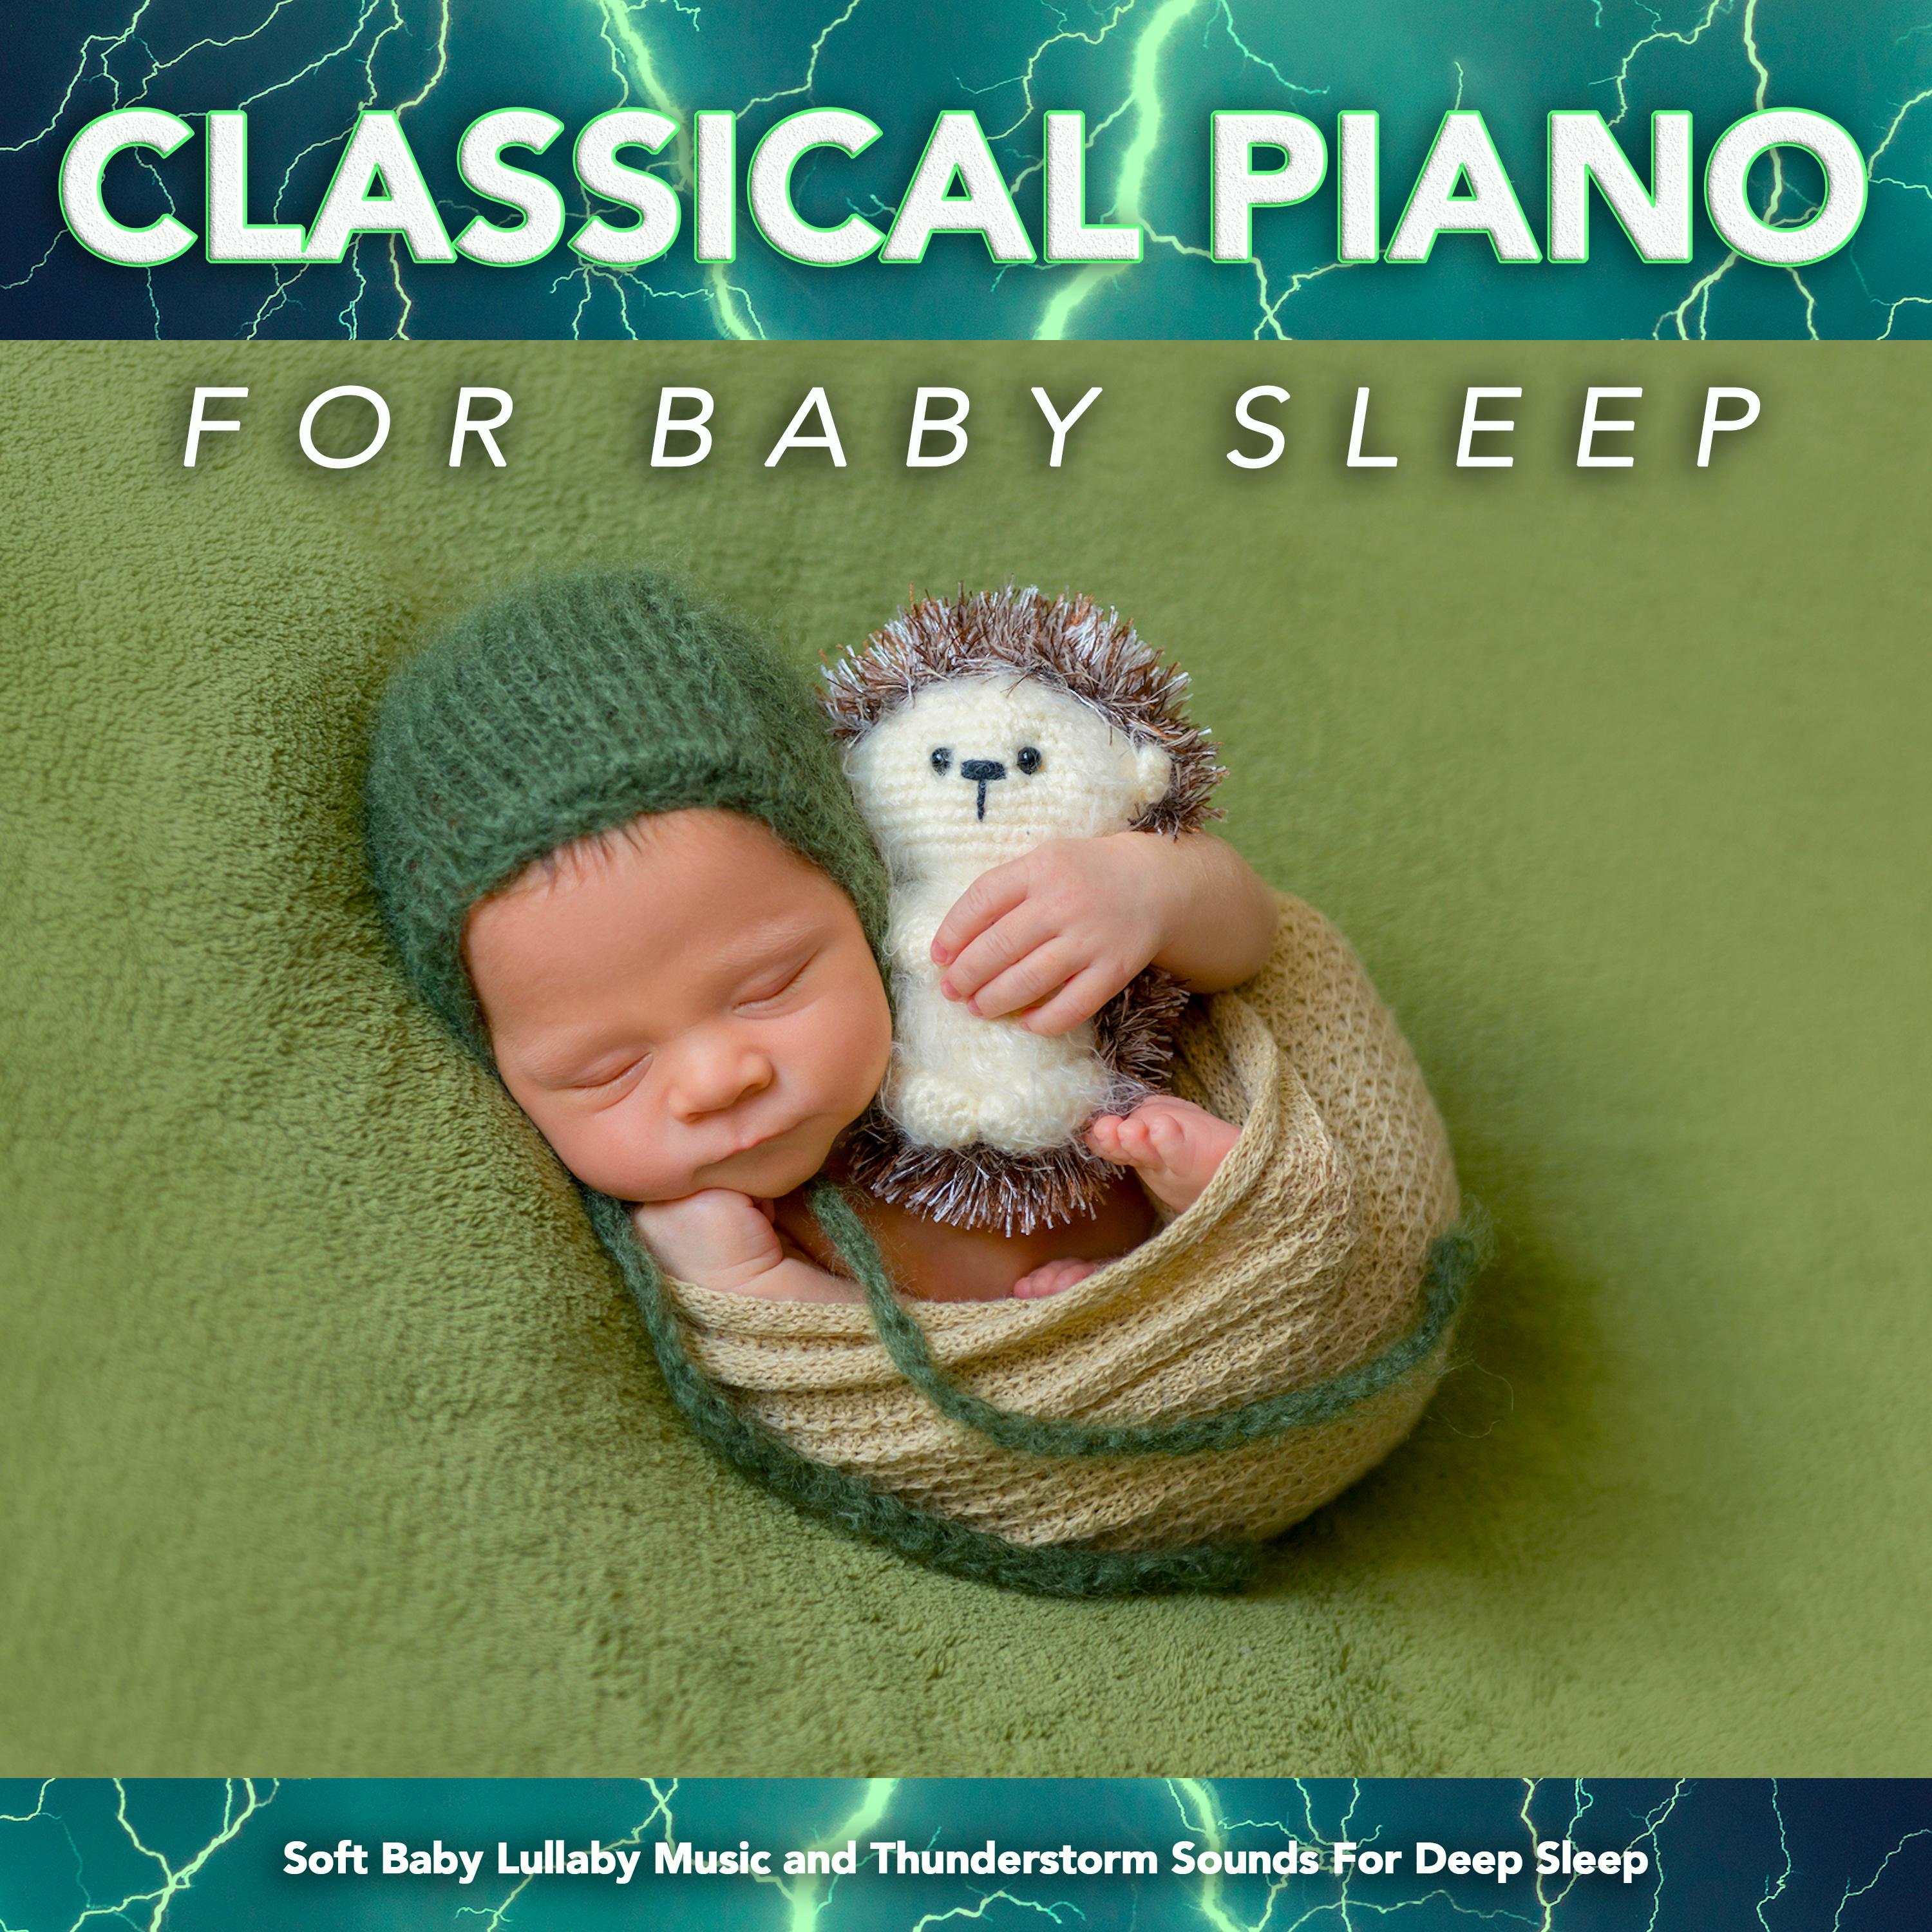 Variations on a Theme - Rachmaninoff - Soft Baby Lullaby Music - Thunderstorm Sounds - Classical Piano for Baby Sleep